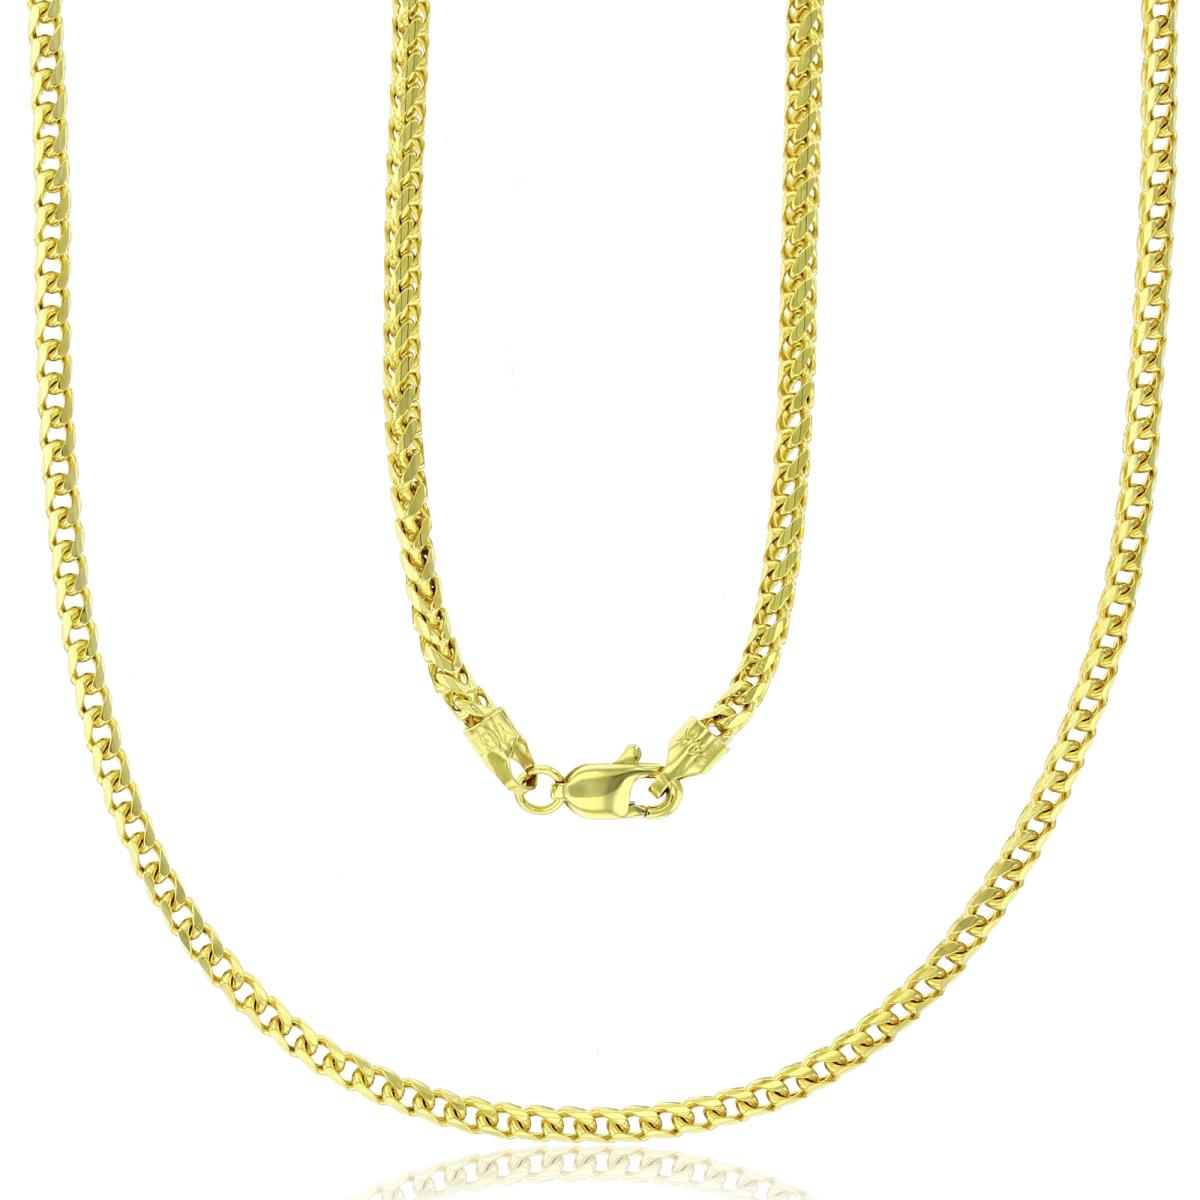 14K Yellow Gold 2.75mm 26" Solid Franco 080 Chain